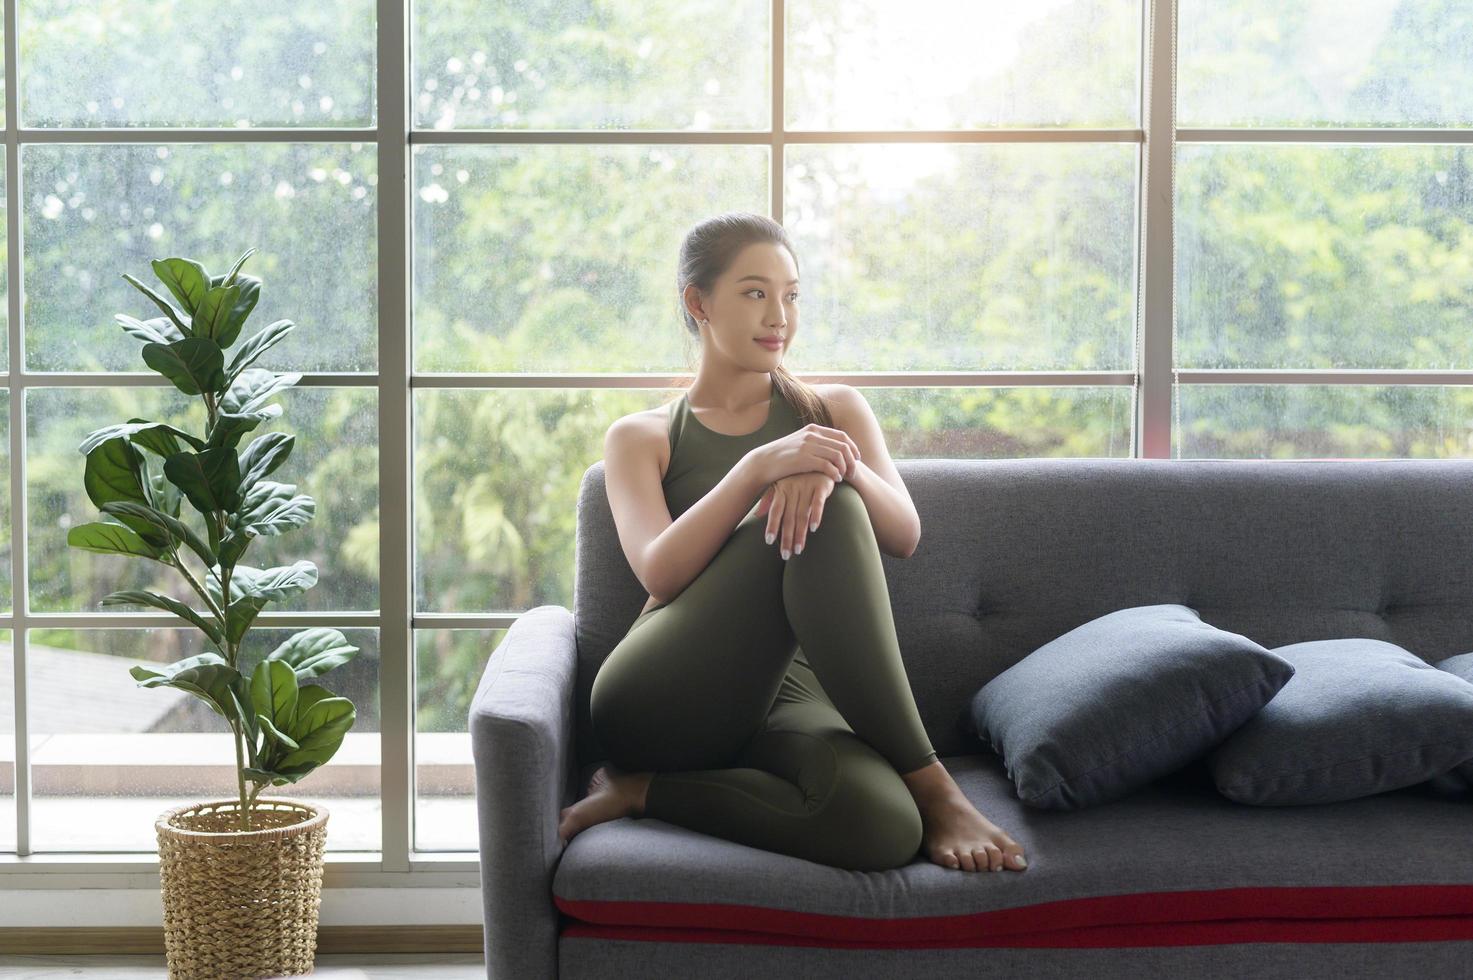 fit beautiful asain woman in sportswear sitting and relaxing on sofa after workout, health and exercise concept photo